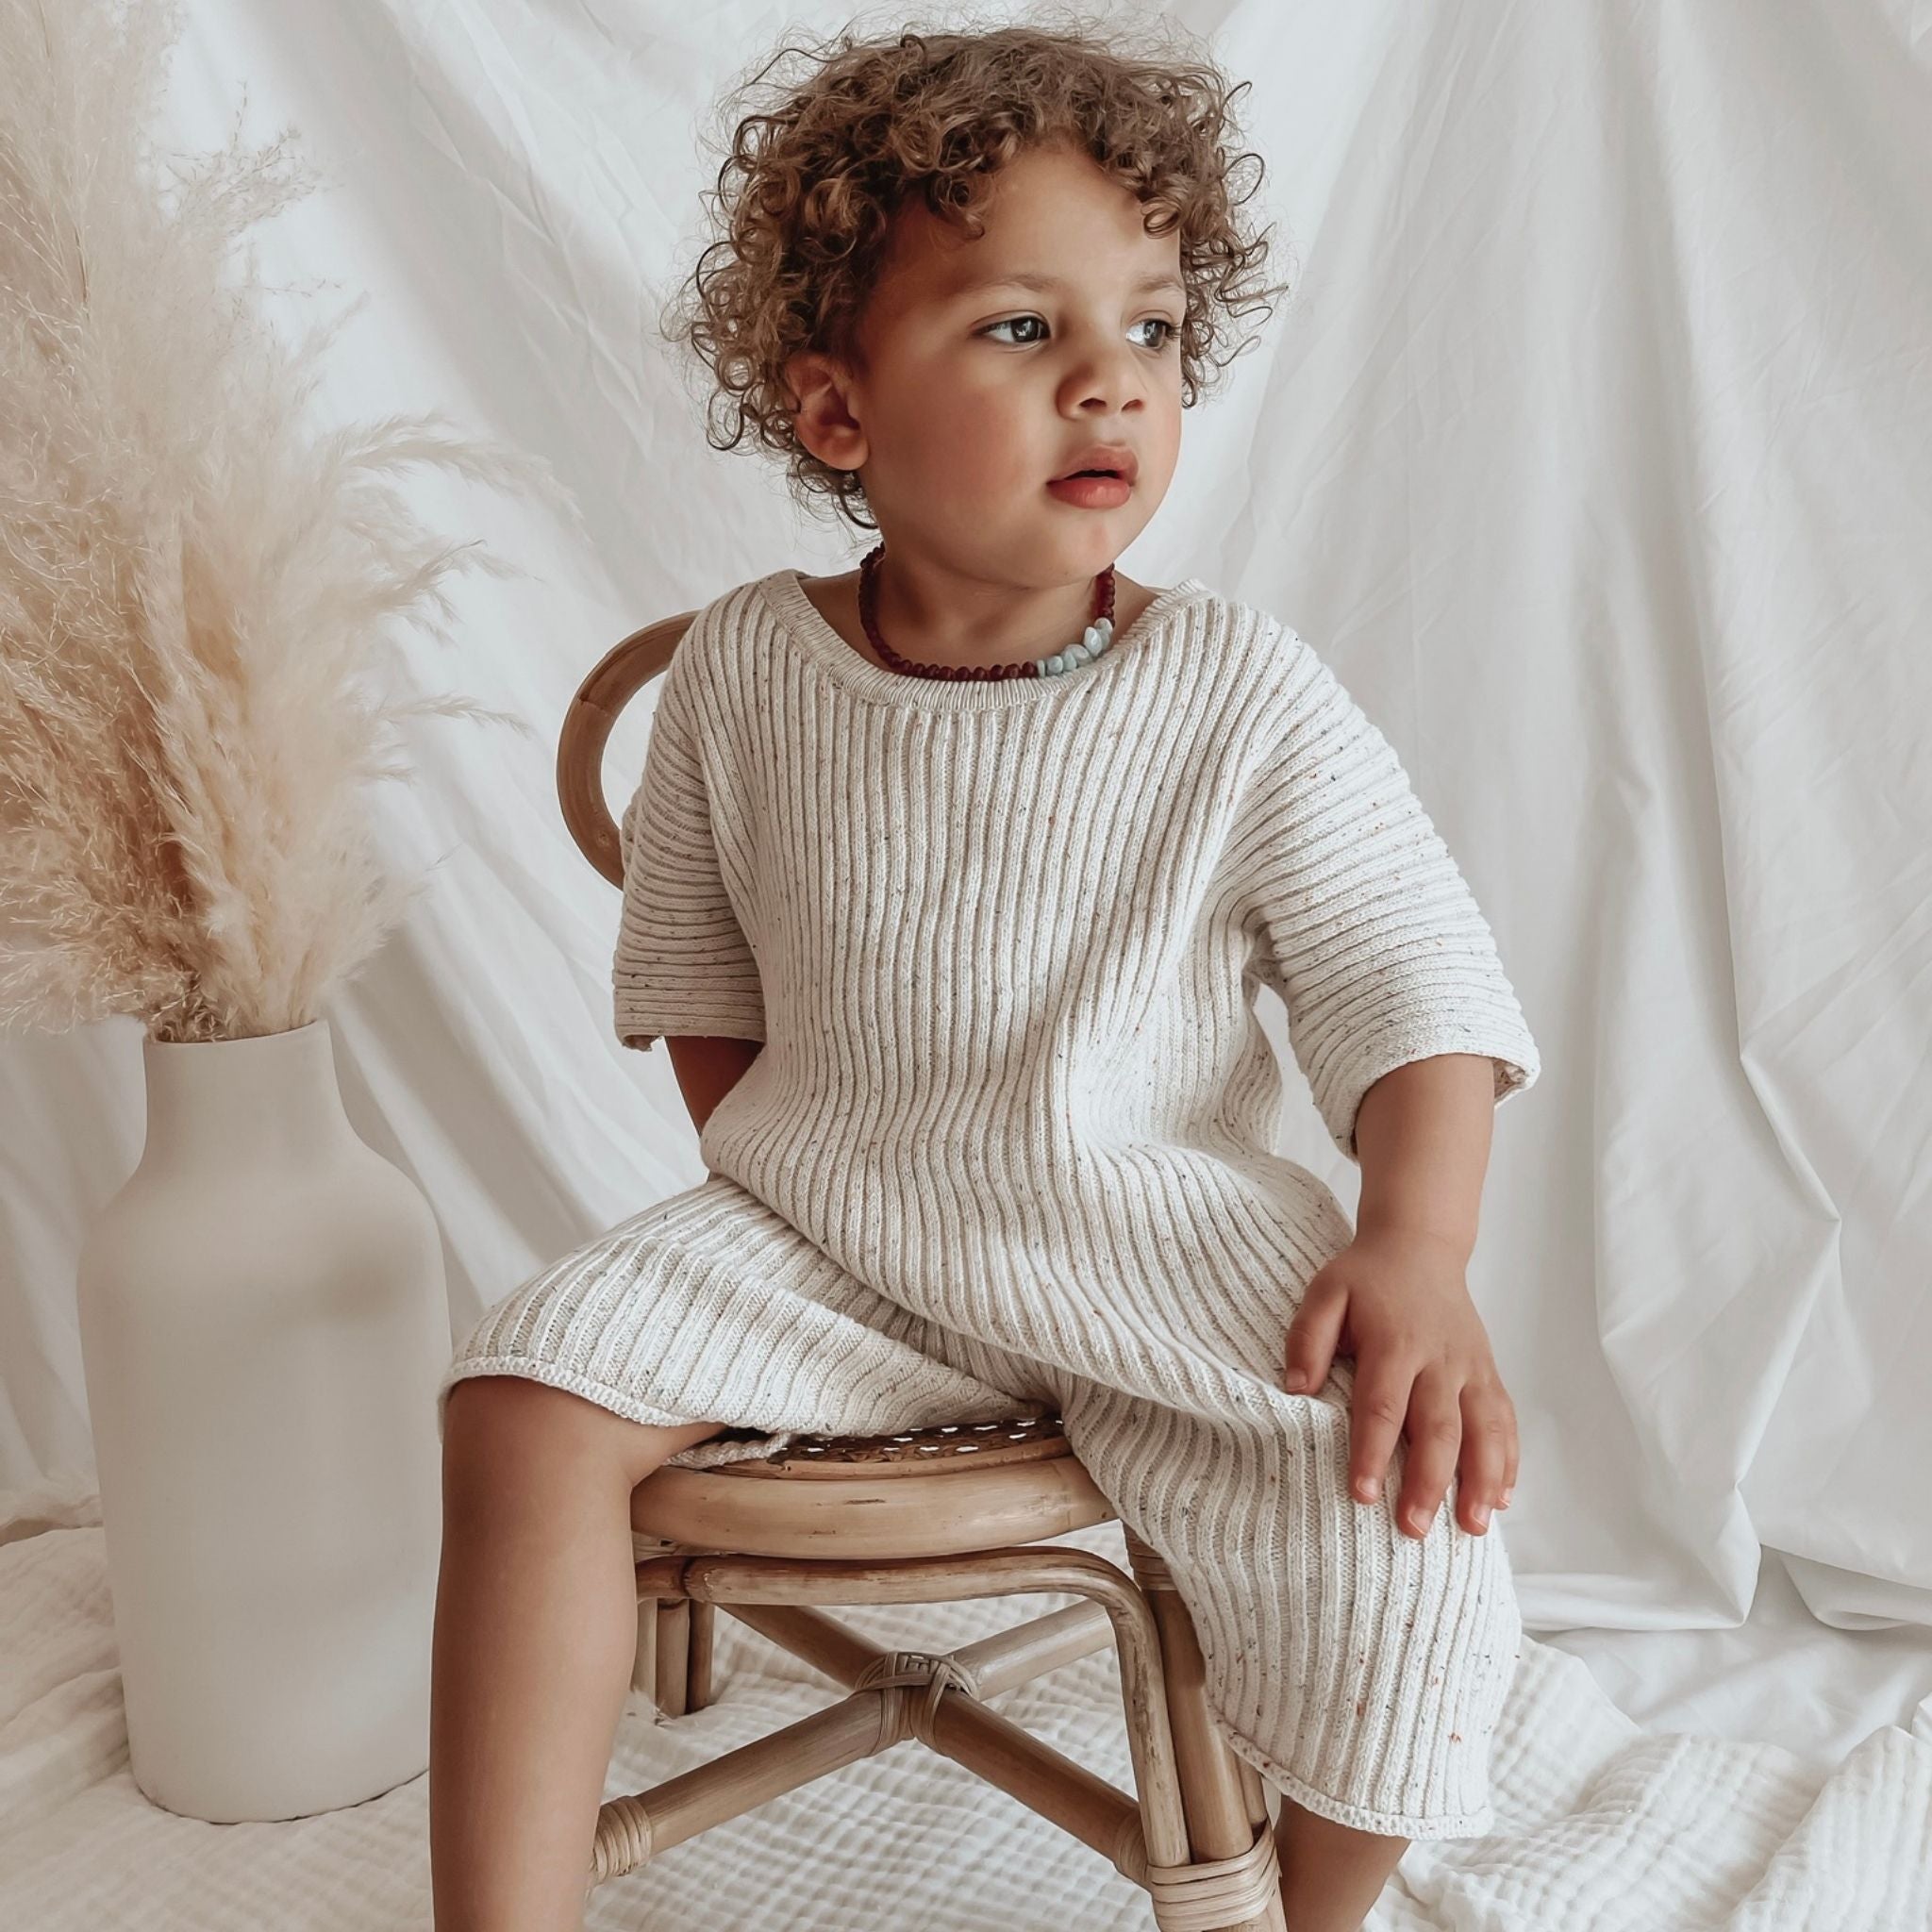 Oat Co Sprinkled Rib Knit Playsuit (Baby Unisex)